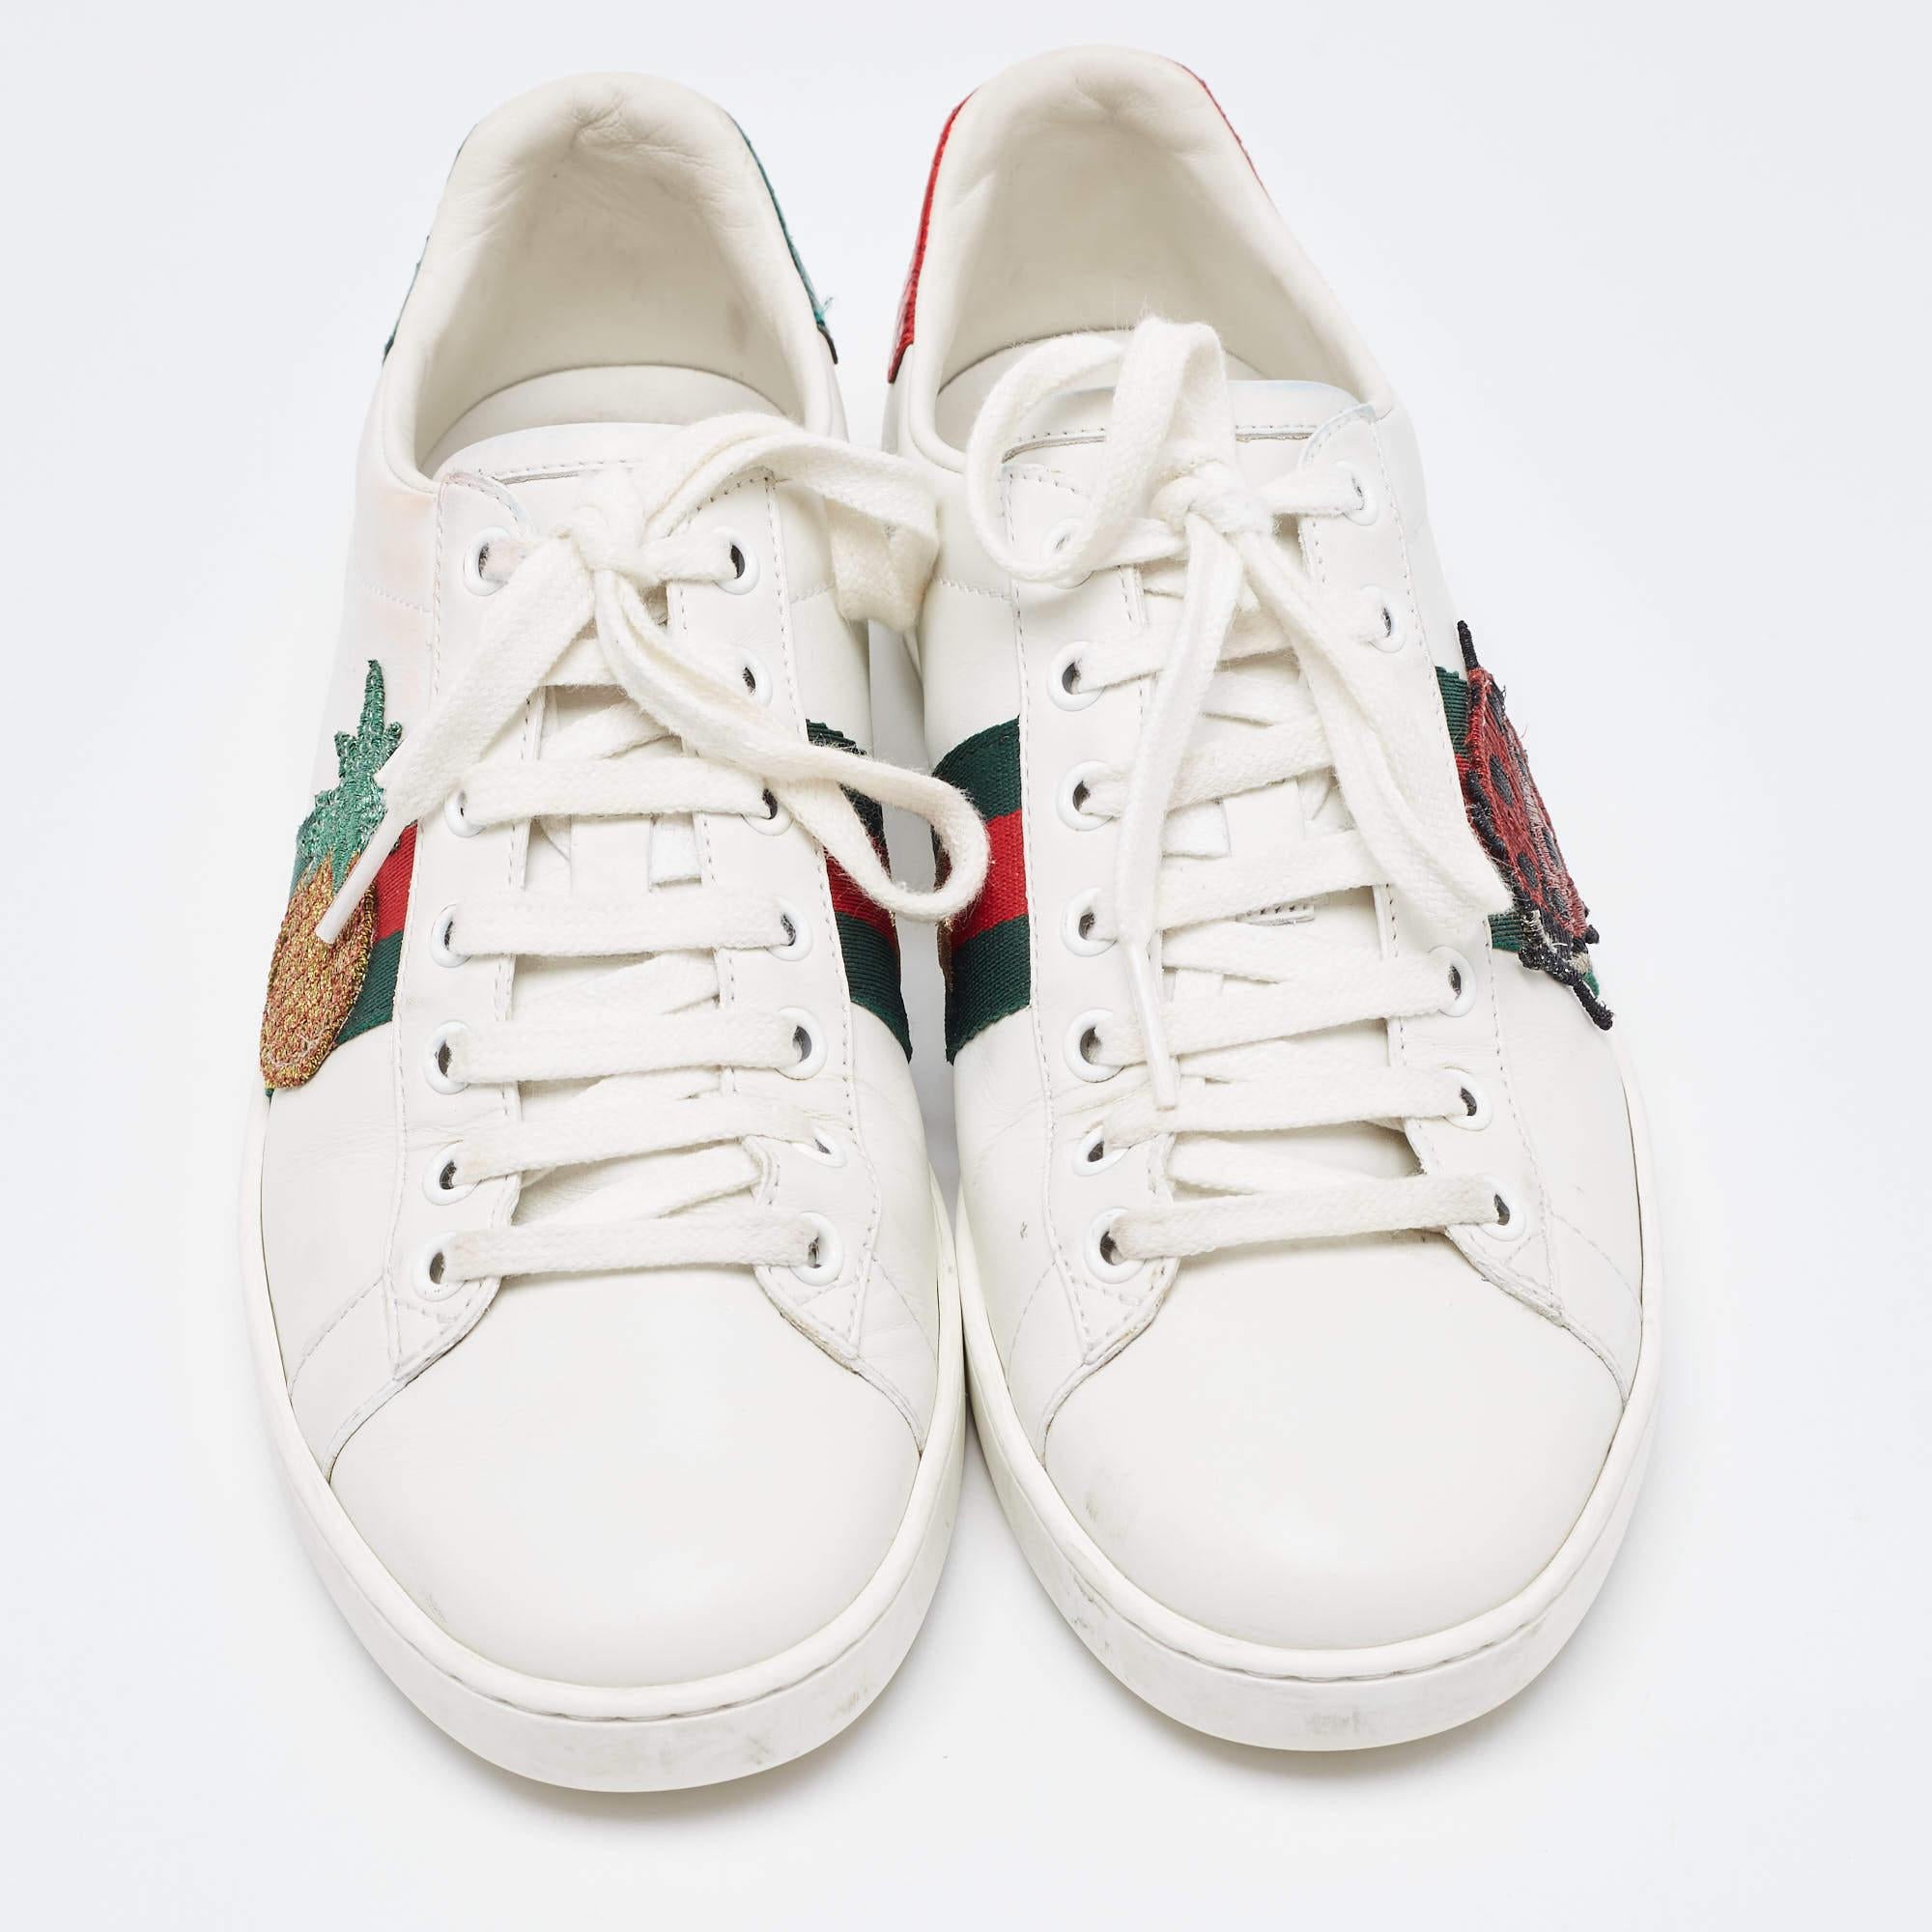 Gray Gucci White/Red Leather and Snake Embossed Leather Ace Pineapple Sneakers Size 3